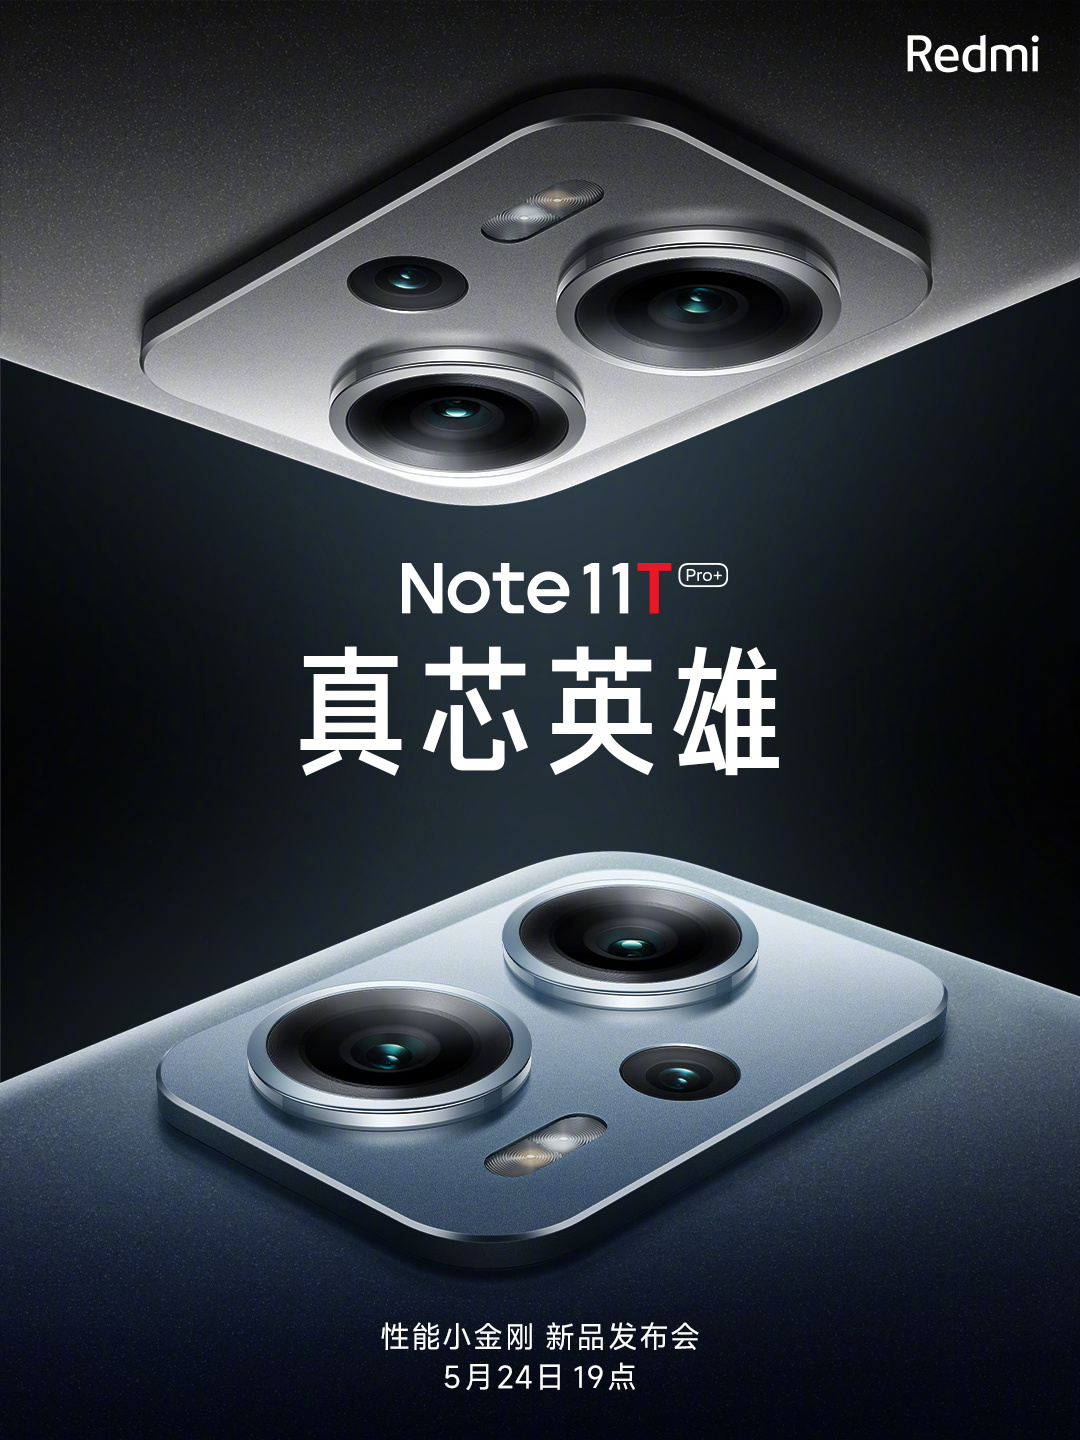 Redmi Note 11T Pro, 11T Pro+ launch date confirmed, here's what to